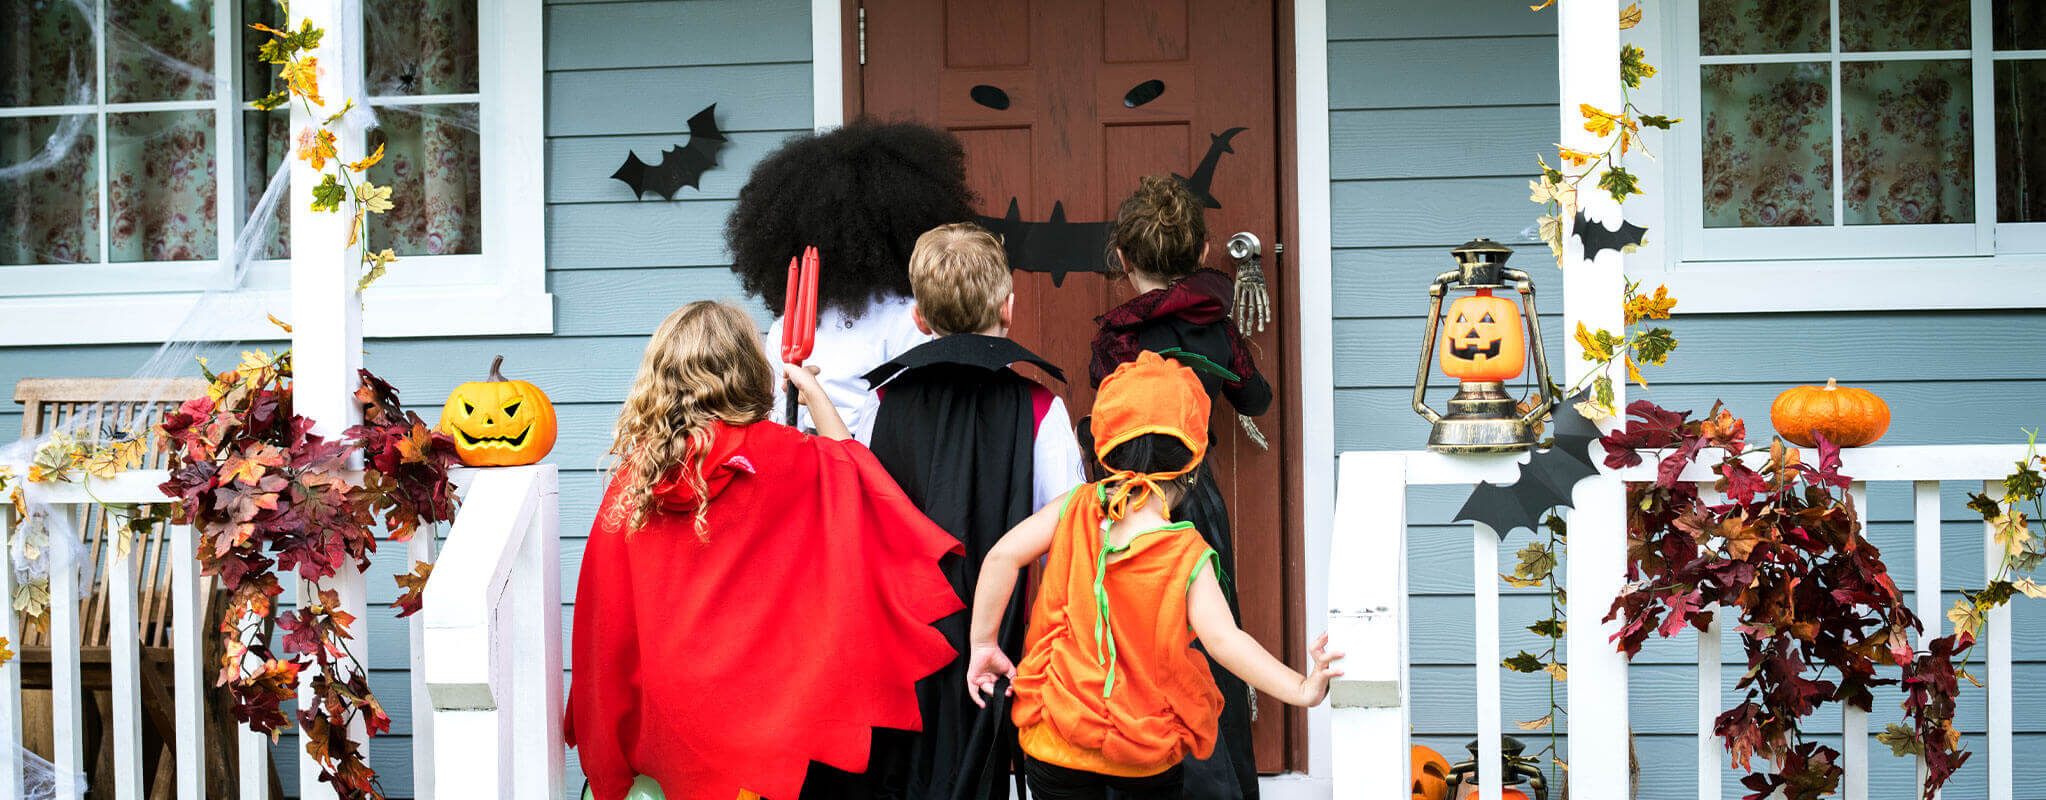 Halloween Safety Tips: Keep Your Rental Property Trick-Free